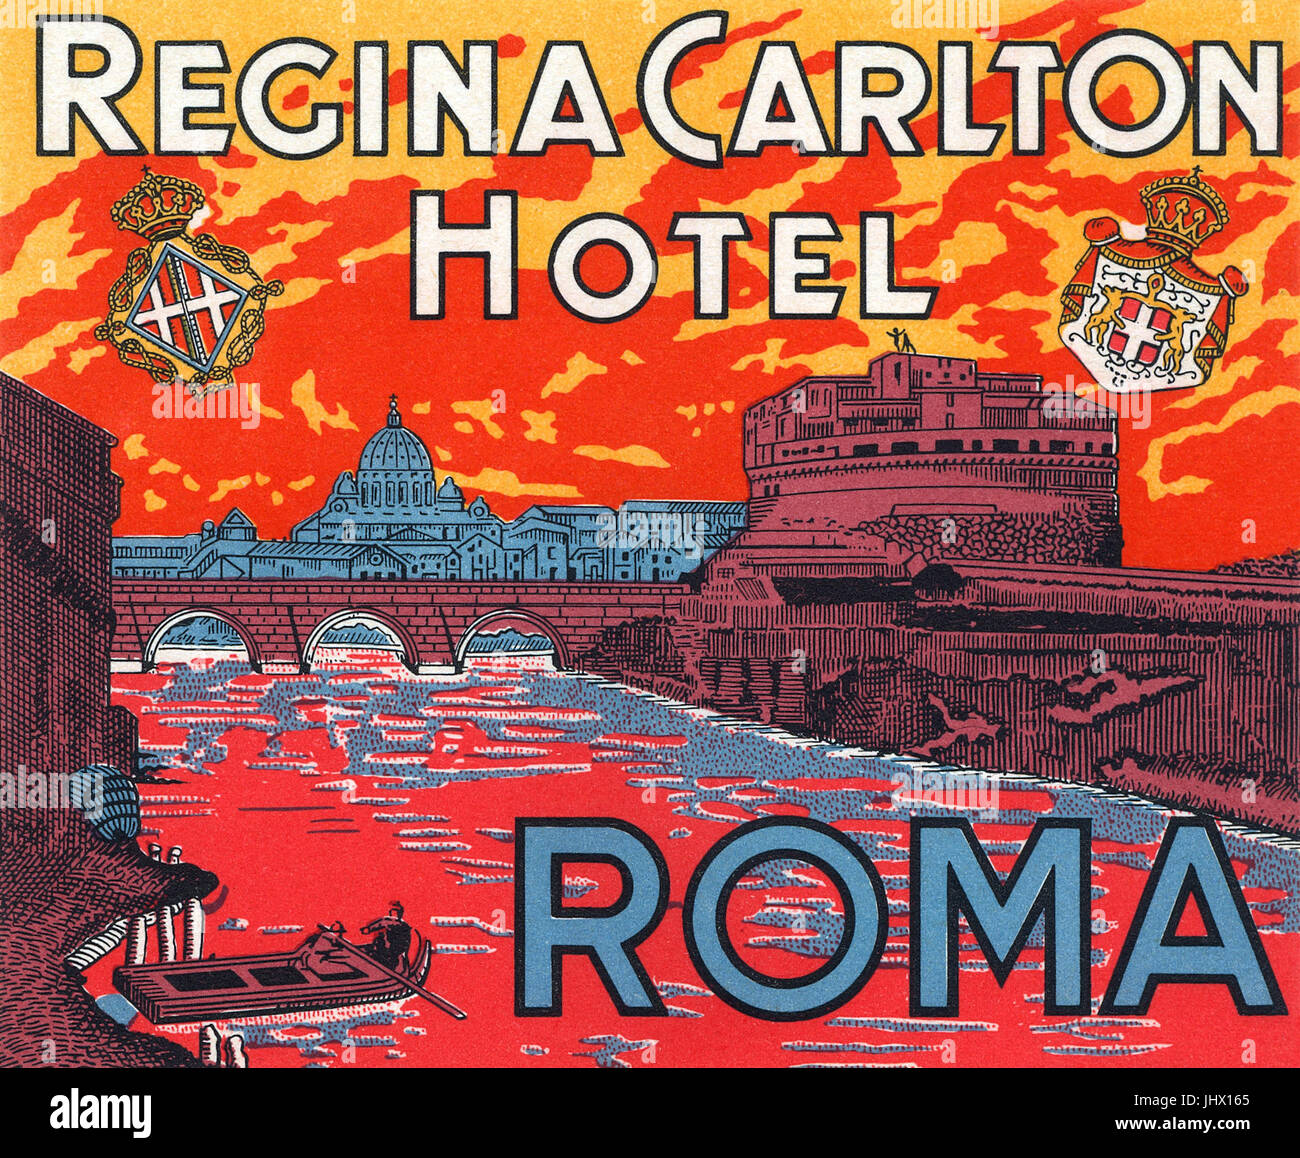 Vintage luggage label for the Regina Carlton Hotel In Rome, Italy. Stock Photo